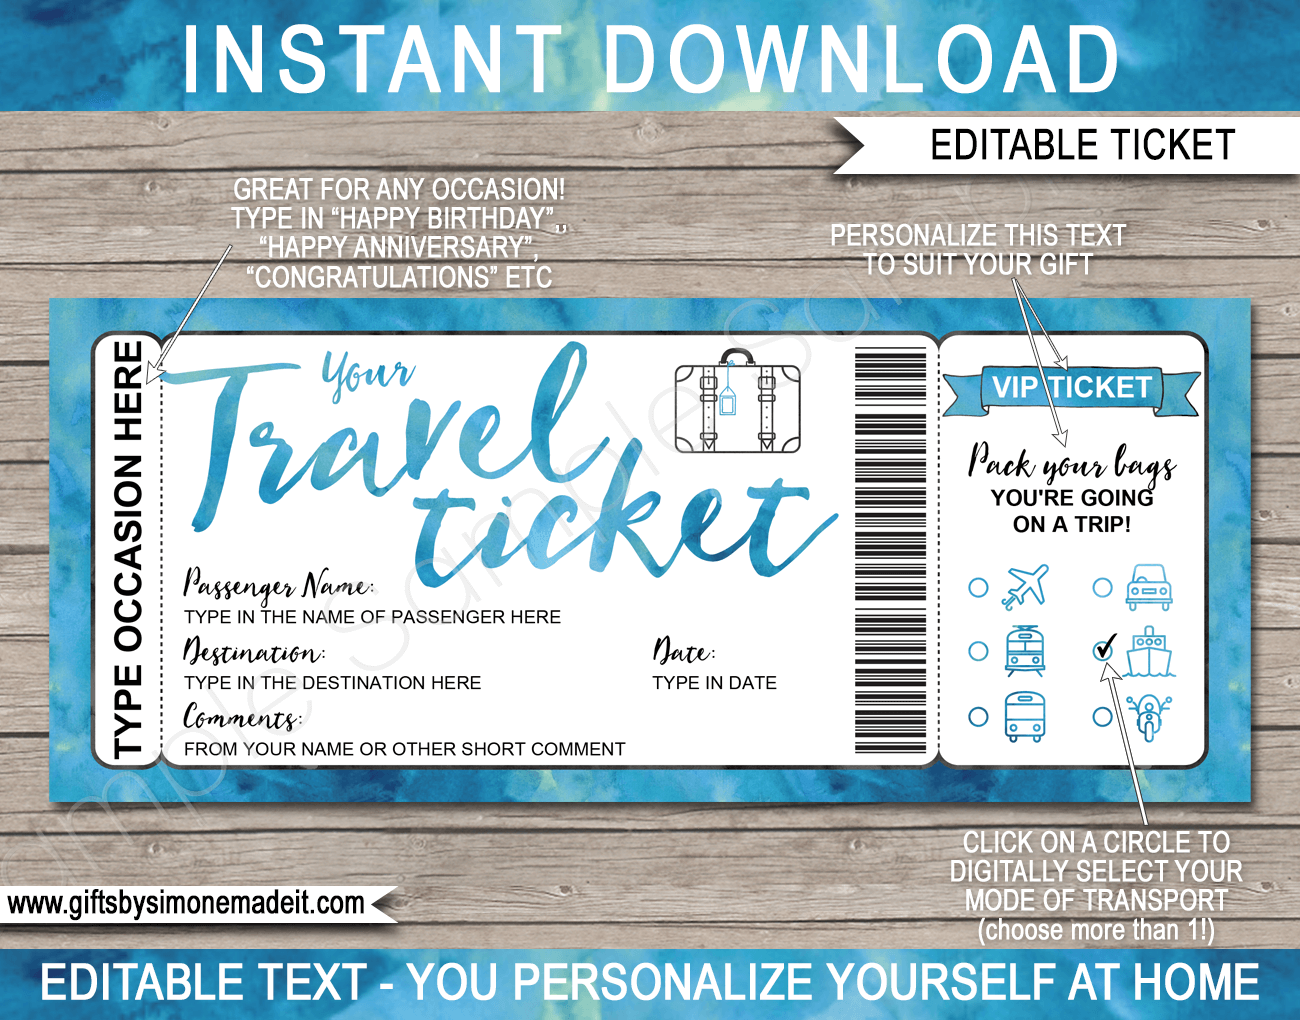 boarding-pass-template-for-gifting-a-surprise-trip-free-download